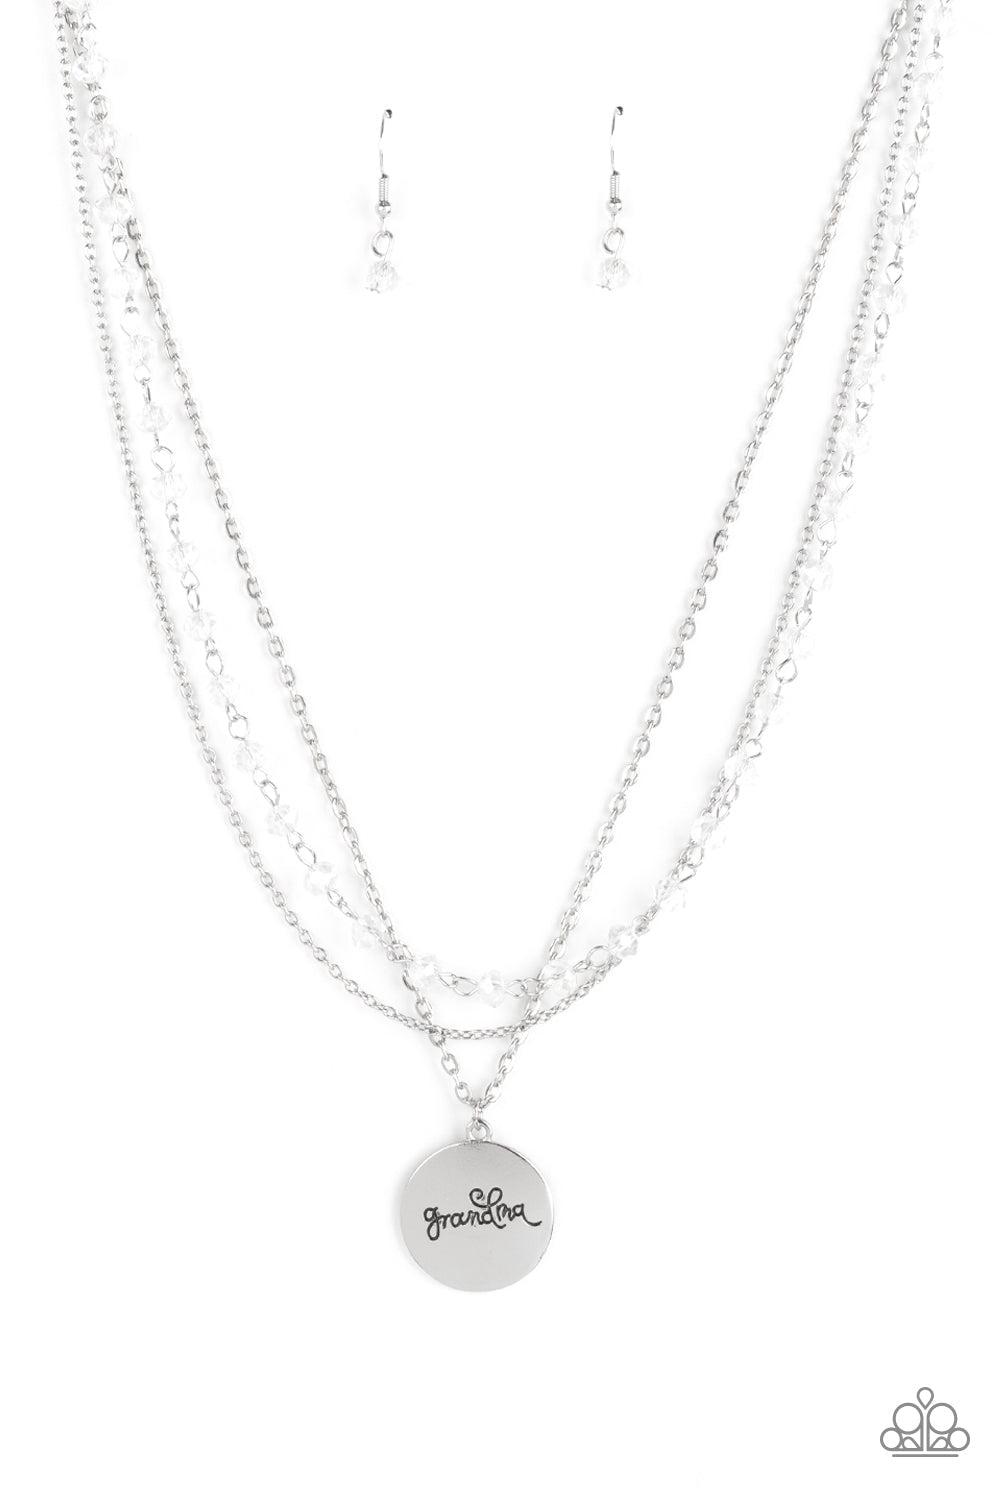 Promoted to Grandma White Inspirational Necklace - Paparazzi Accessories- lightbox - CarasShop.com - $5 Jewelry by Cara Jewels